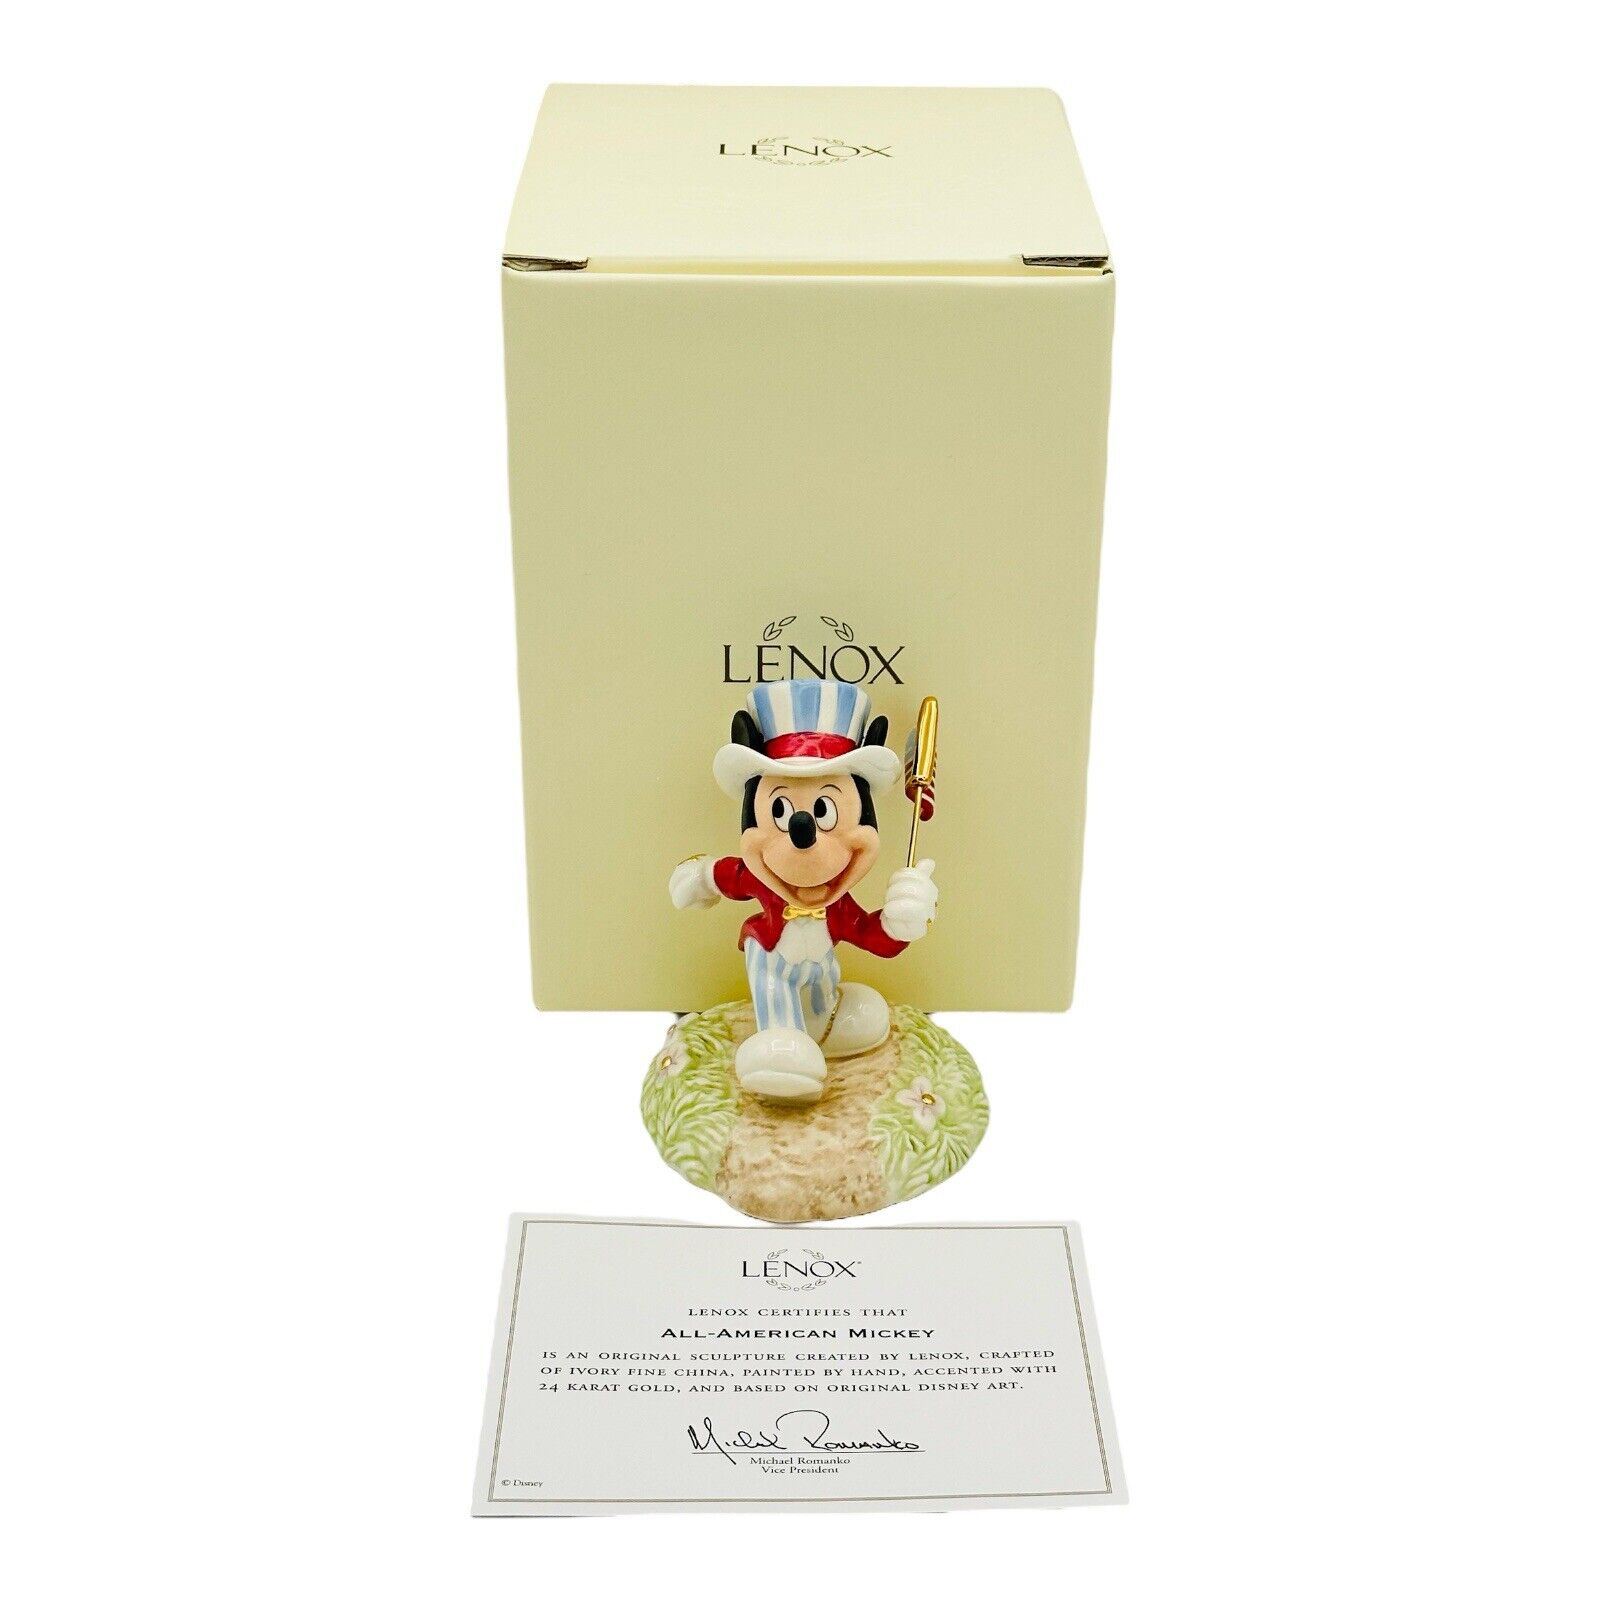 Lenox Disney All American Mickey For All Seasons Collection ne Sculpture